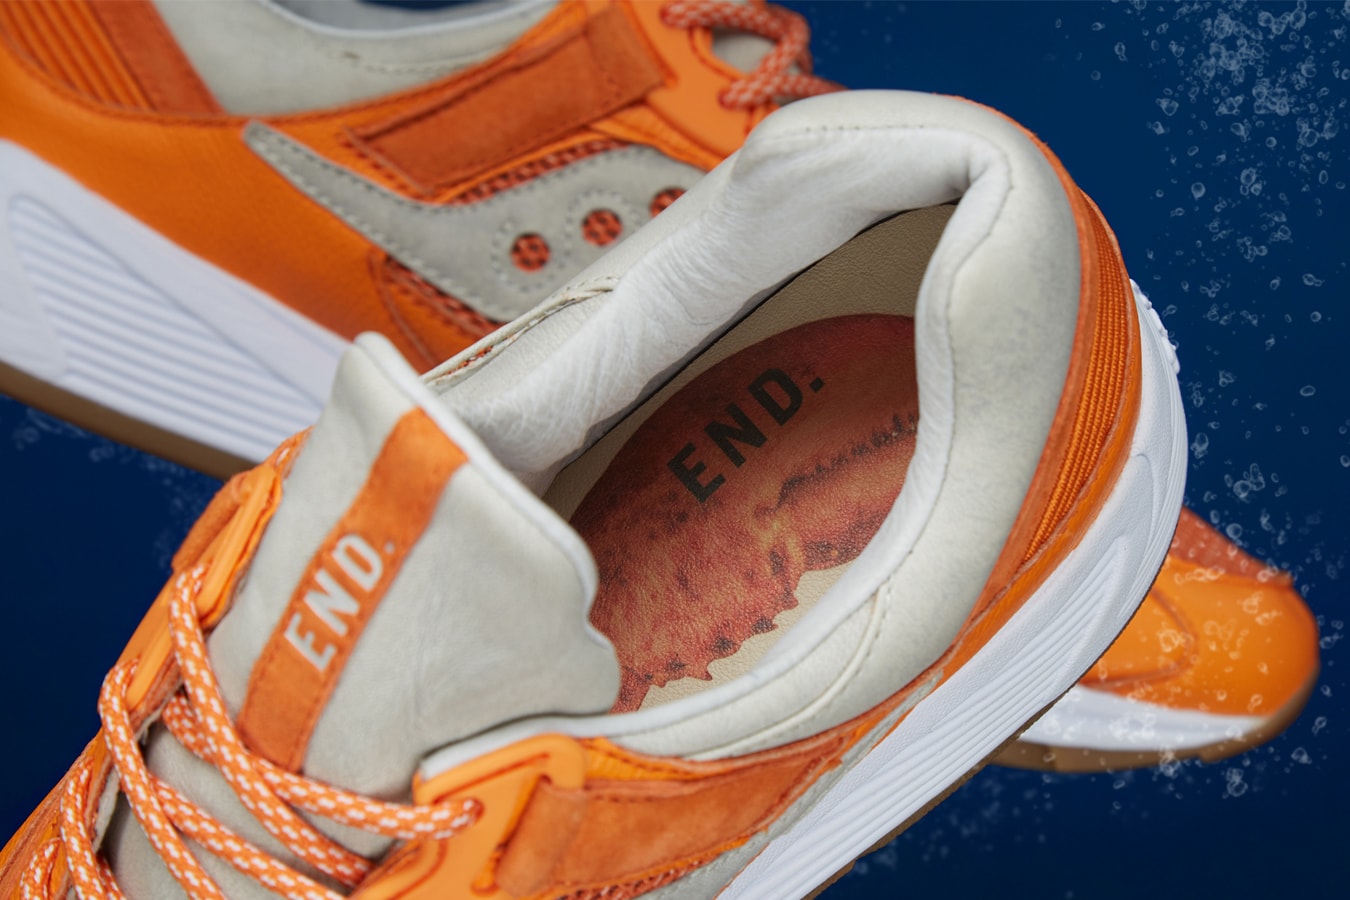 END Clothing Saucony Grid 8500 Lobster Release Info Details Jaffa Orange Peel Orange Blue Closer Look how to buy cop purchase drop may 11 2018